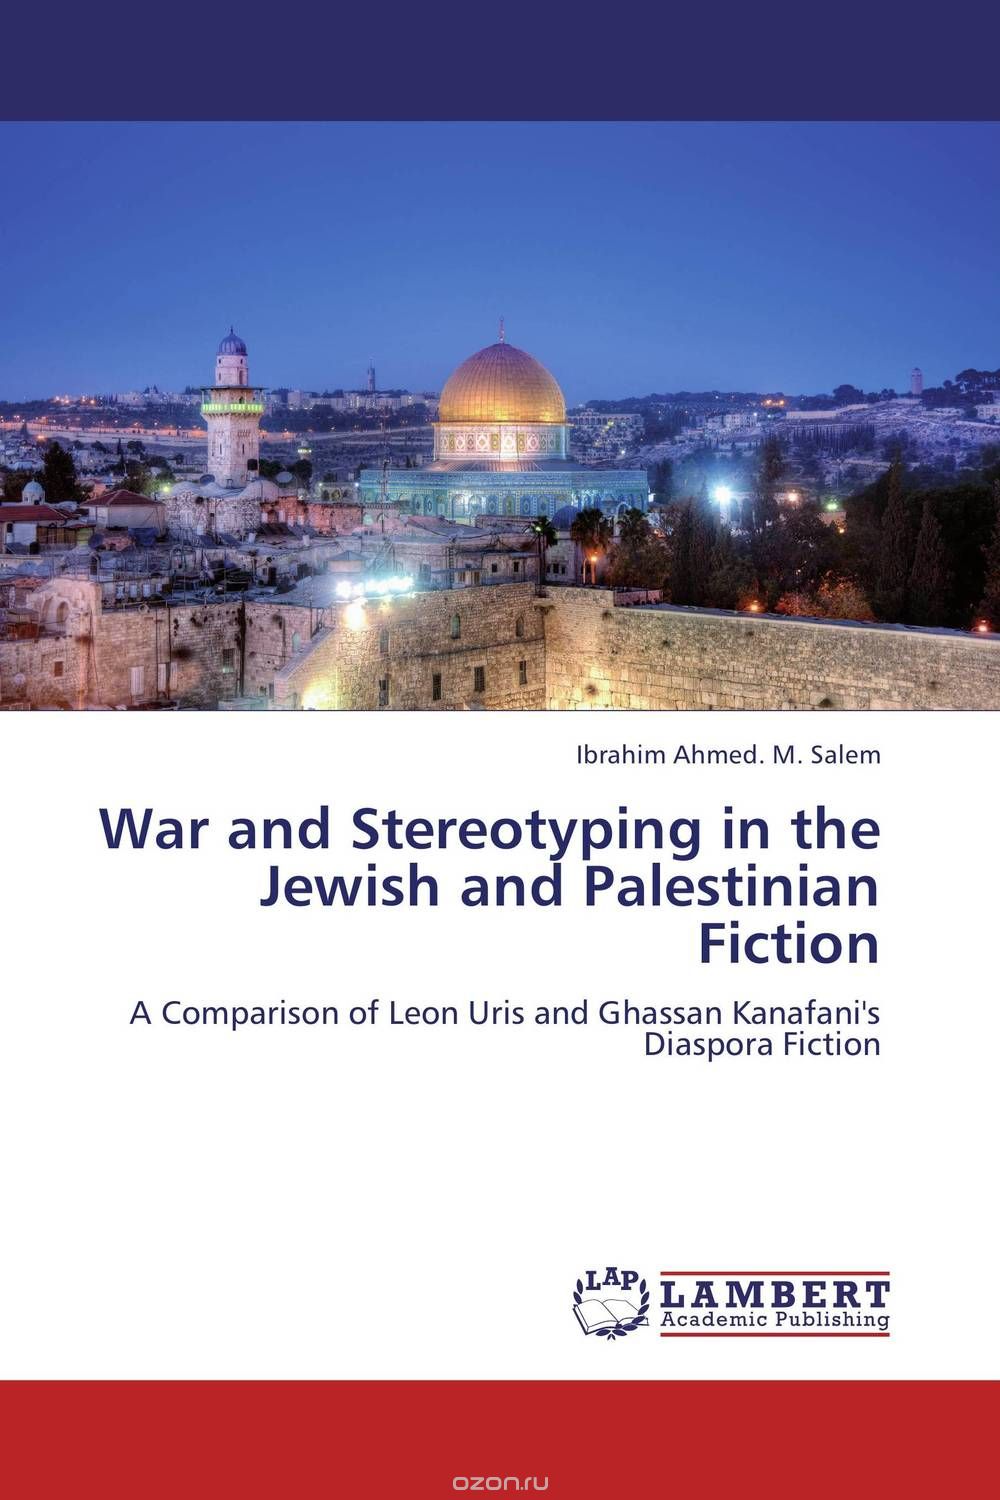 Скачать книгу "War and Stereotyping in the Jewish and Palestinian Fiction"